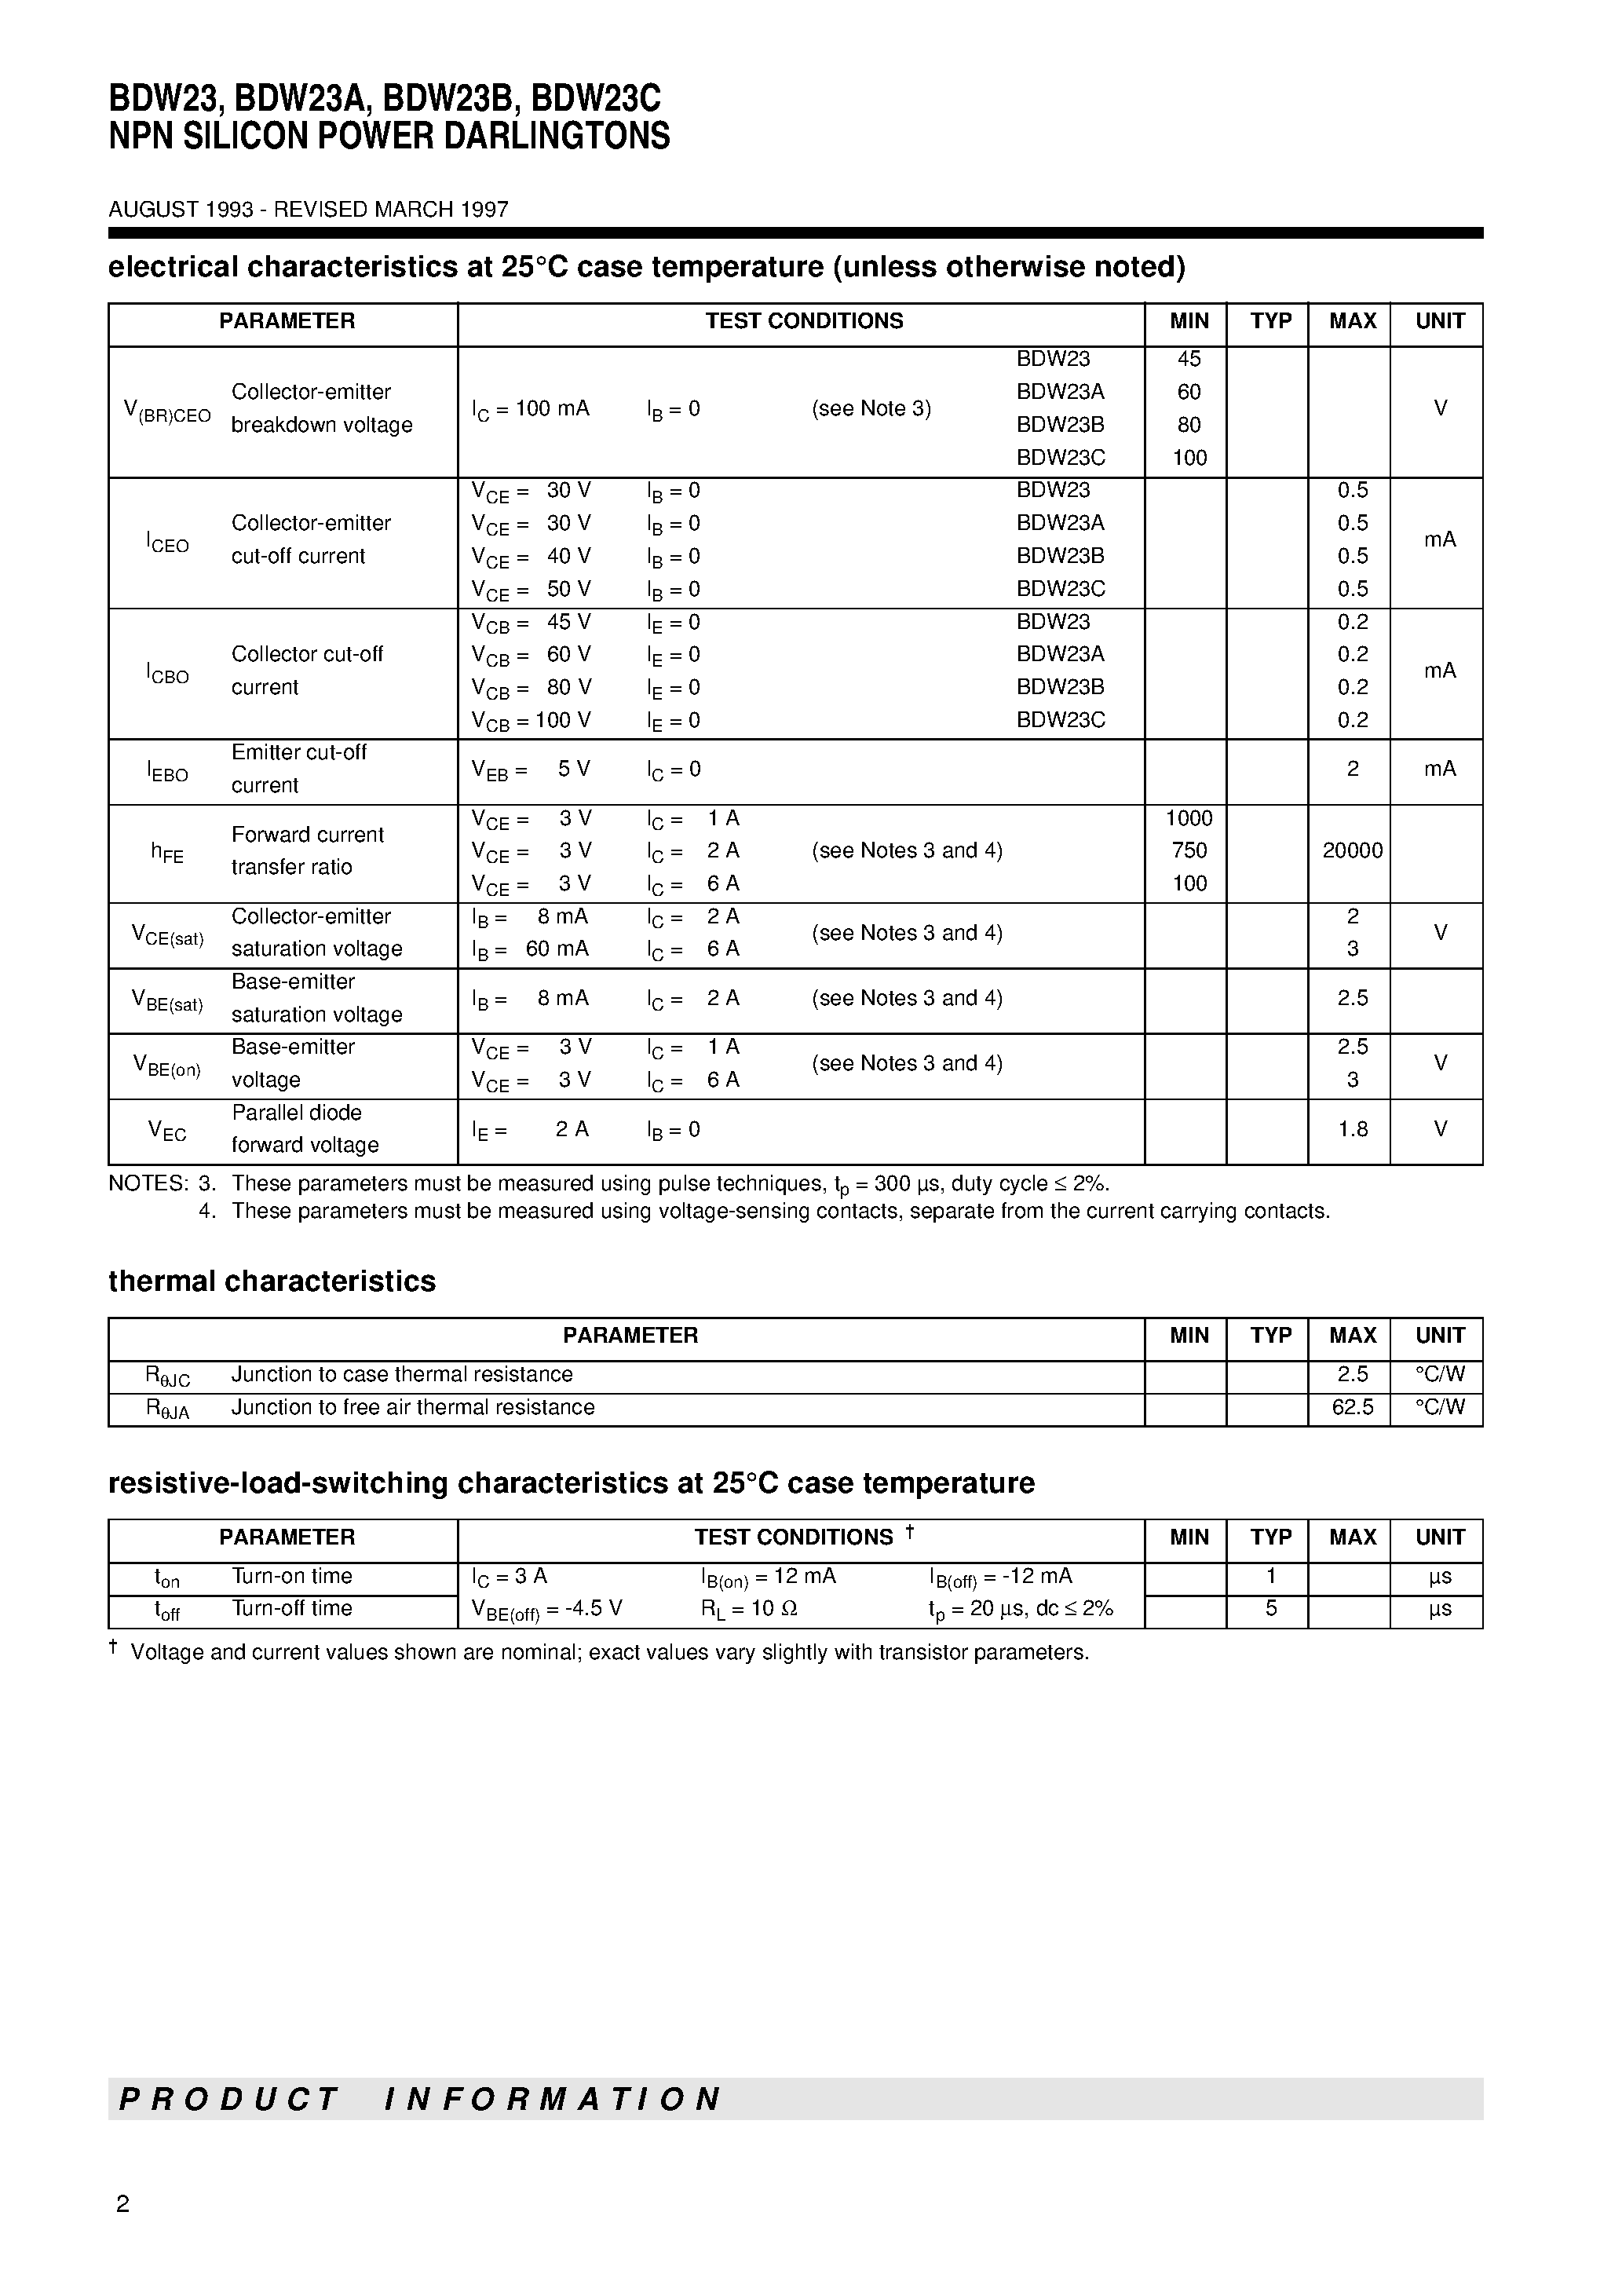 Datasheet BDW23 - NPN SILICON POWER DARLINGTONS page 2